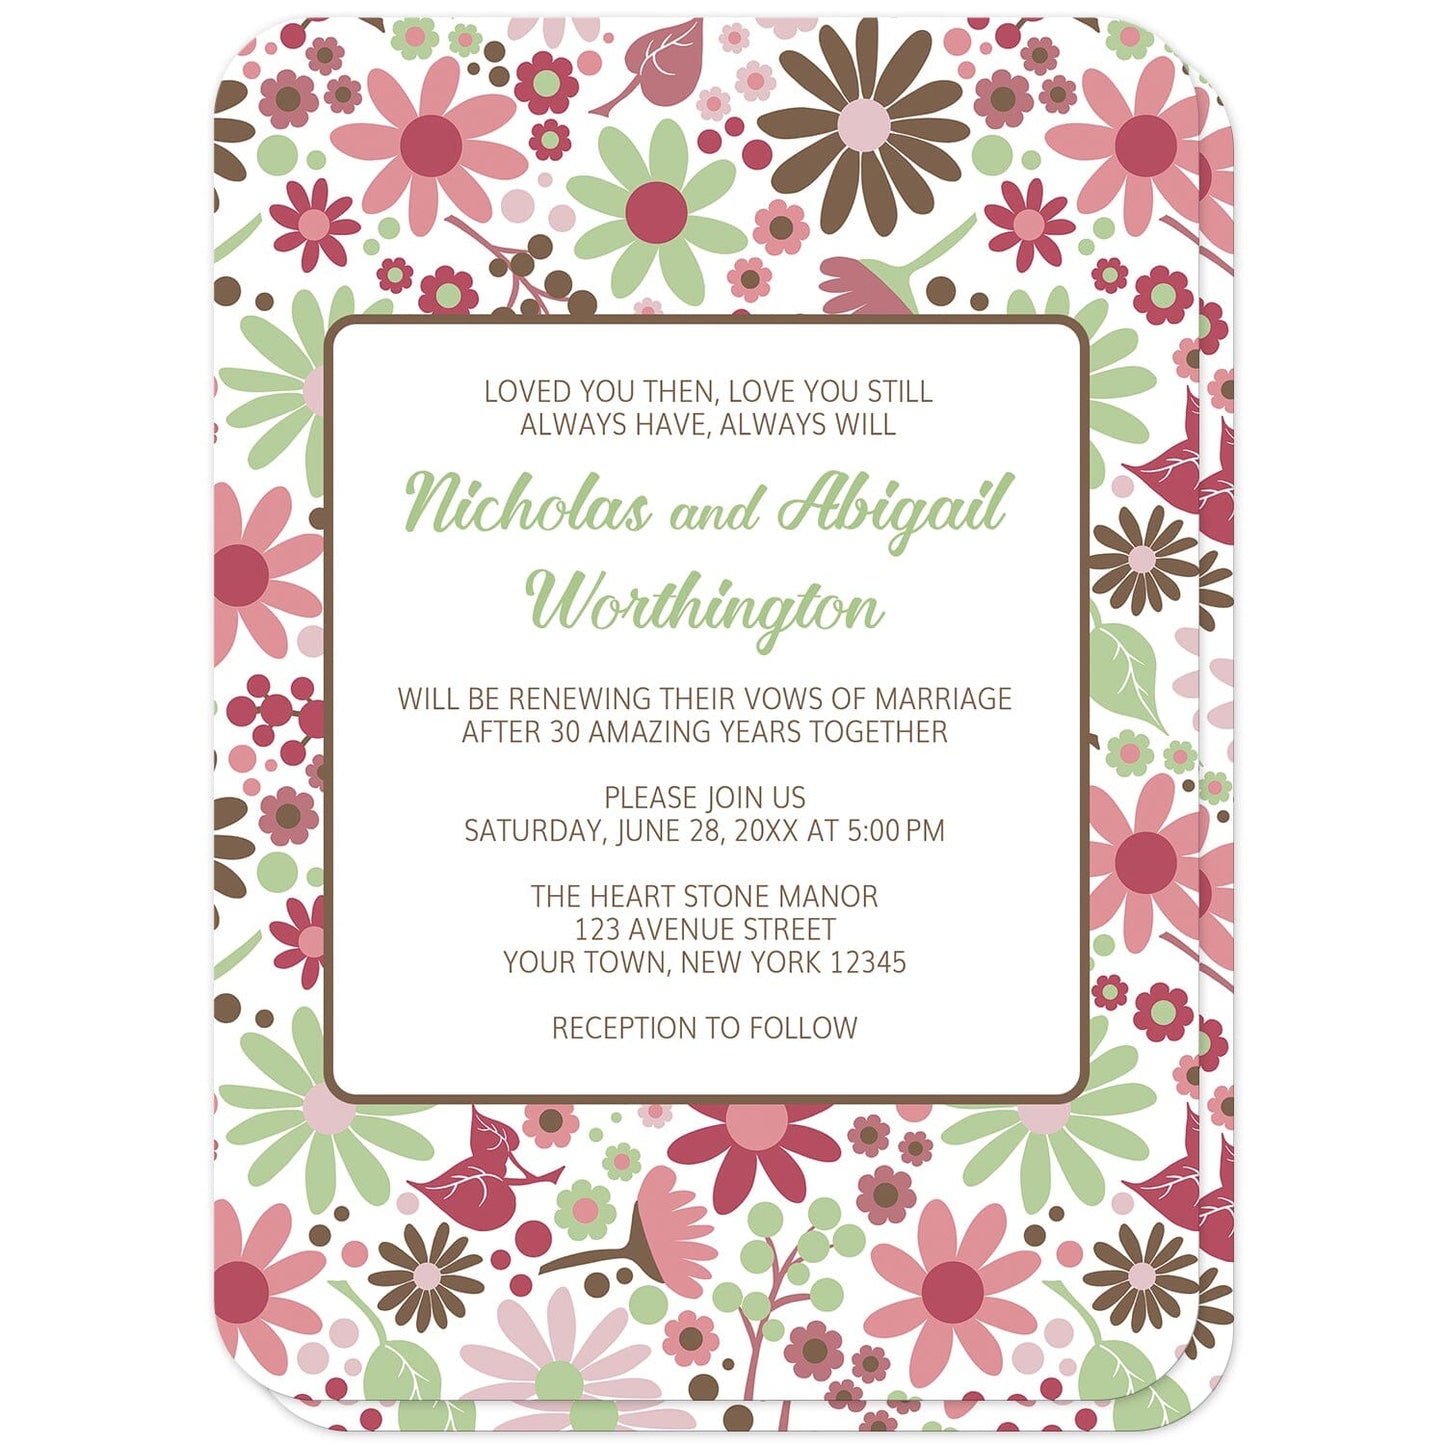 Berry Green Summer Flowers Vow Renewal Invitations (front with rounded corners) at Artistically Invited. Beautiful berry green summer flowers vow renewal invitations designed with a pretty summer floral pattern in different hues of berry pink with green and brown. Personalize these invitations with your occasion details for renewing your vows. They're a gorgeous option for any couple who loves floral designs as they're covered in this flowers pattern on both the front and back of the invitations. 